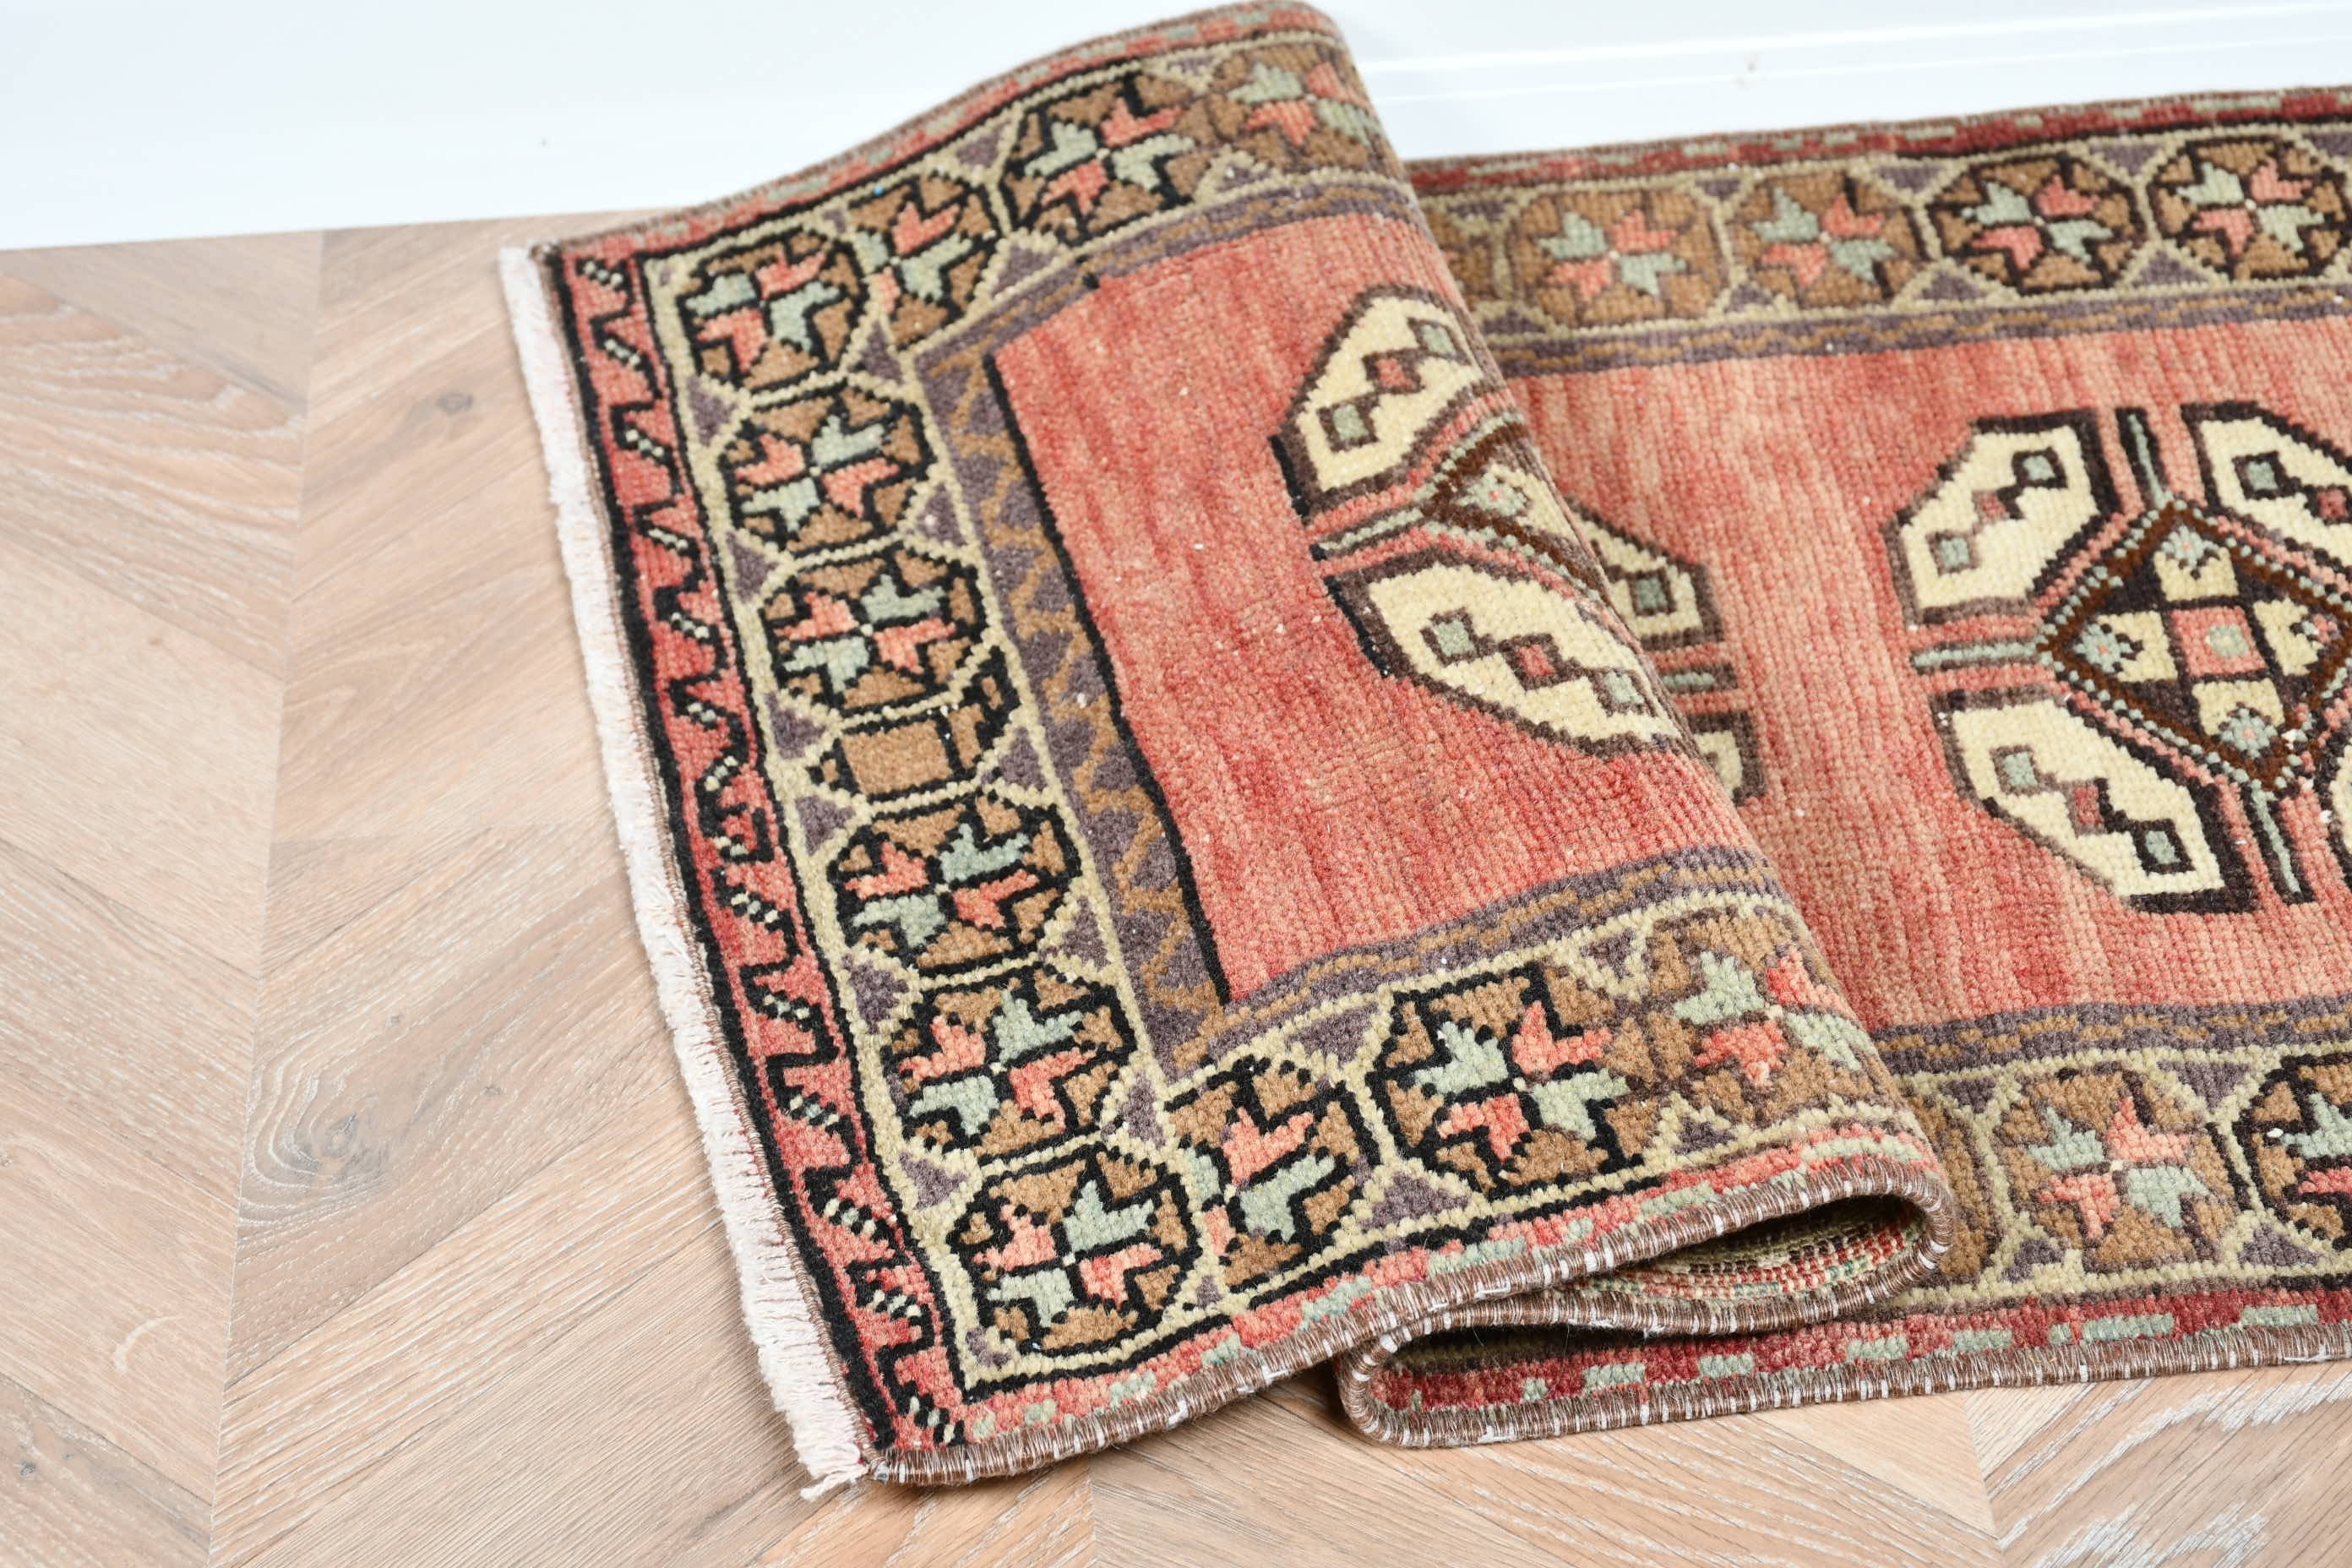 Vintage Rug, 2x3 ft Small Rugs, Turkish Rugs, Red Kitchen Rug, Antique Rug, Car Mat Rug, Rugs for Kitchen, Bedroom Rug